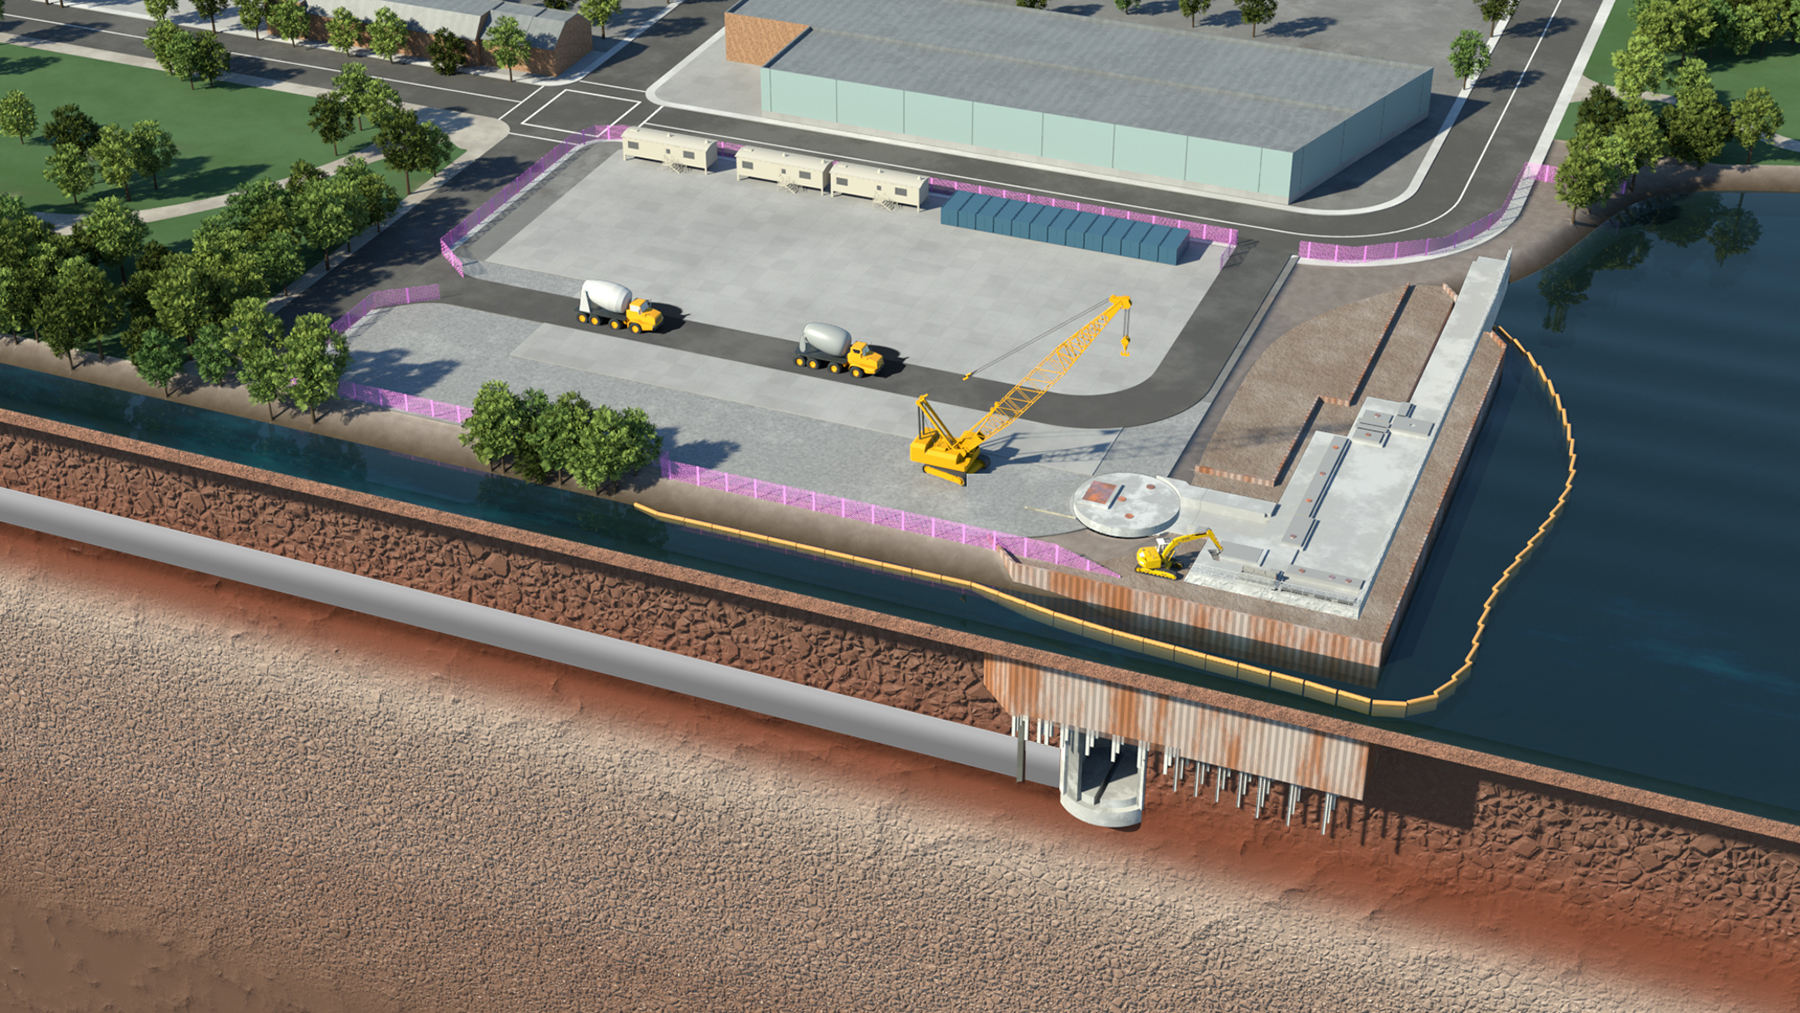 Diversion chambers, like the one seen here, redirect two outfall points into the 2.2 mi tunnel. After cutting into the second chamber, the tunnel boring machine, named Hazel, will be disassembled and pulled out through the shaft. (Rendering courtesy of AlexRenew)